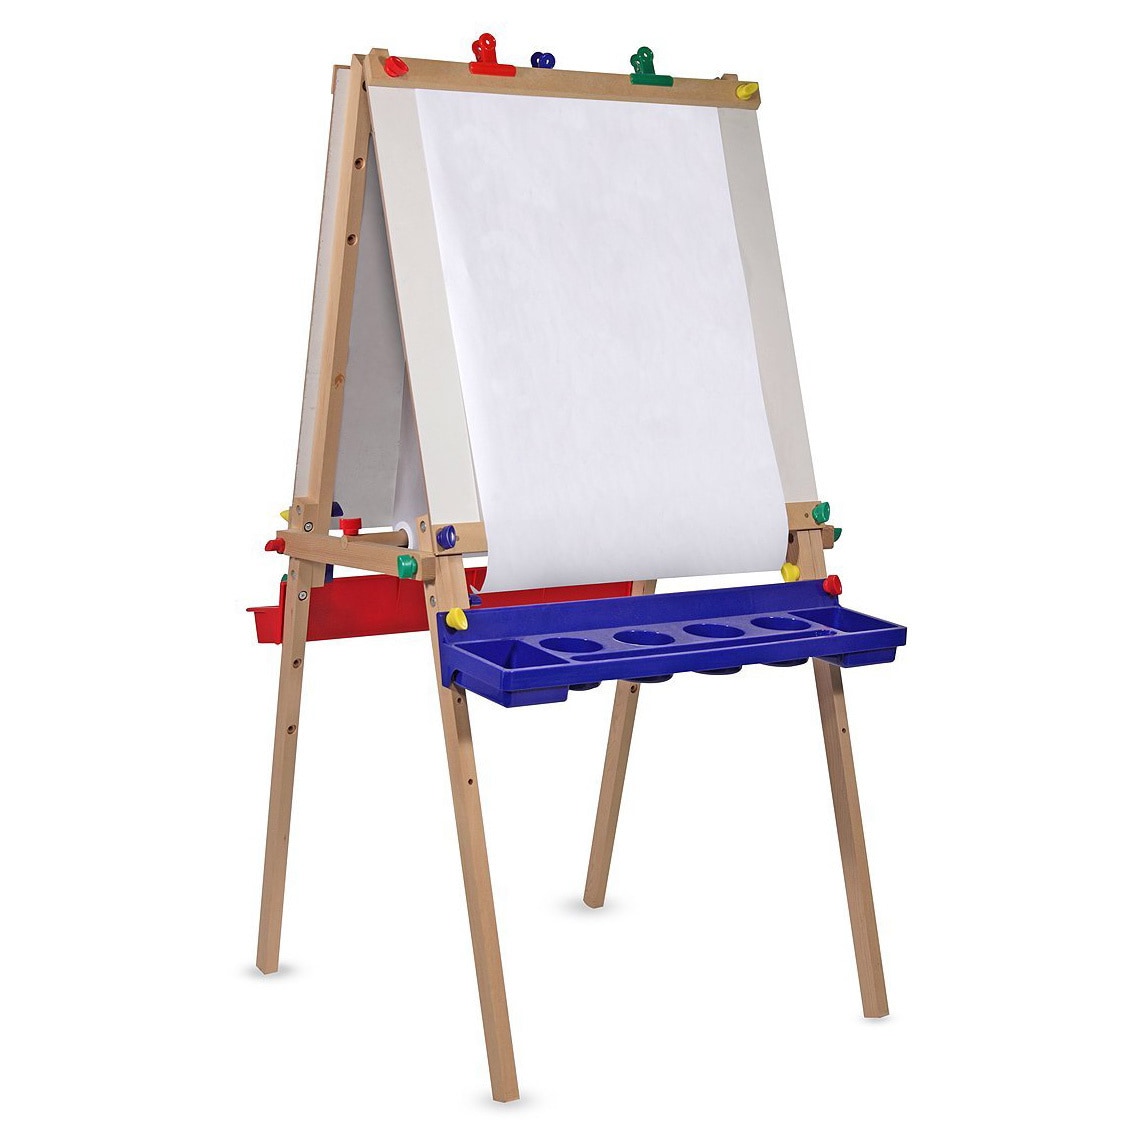 https://ak1.ostkcdn.com/images/products/6217846/Melissa-Doug-Deluxe-Wooden-Standing-Art-Easel-Set-a6c056ab-d605-4807-9069-604bd8ae5f51.jpg